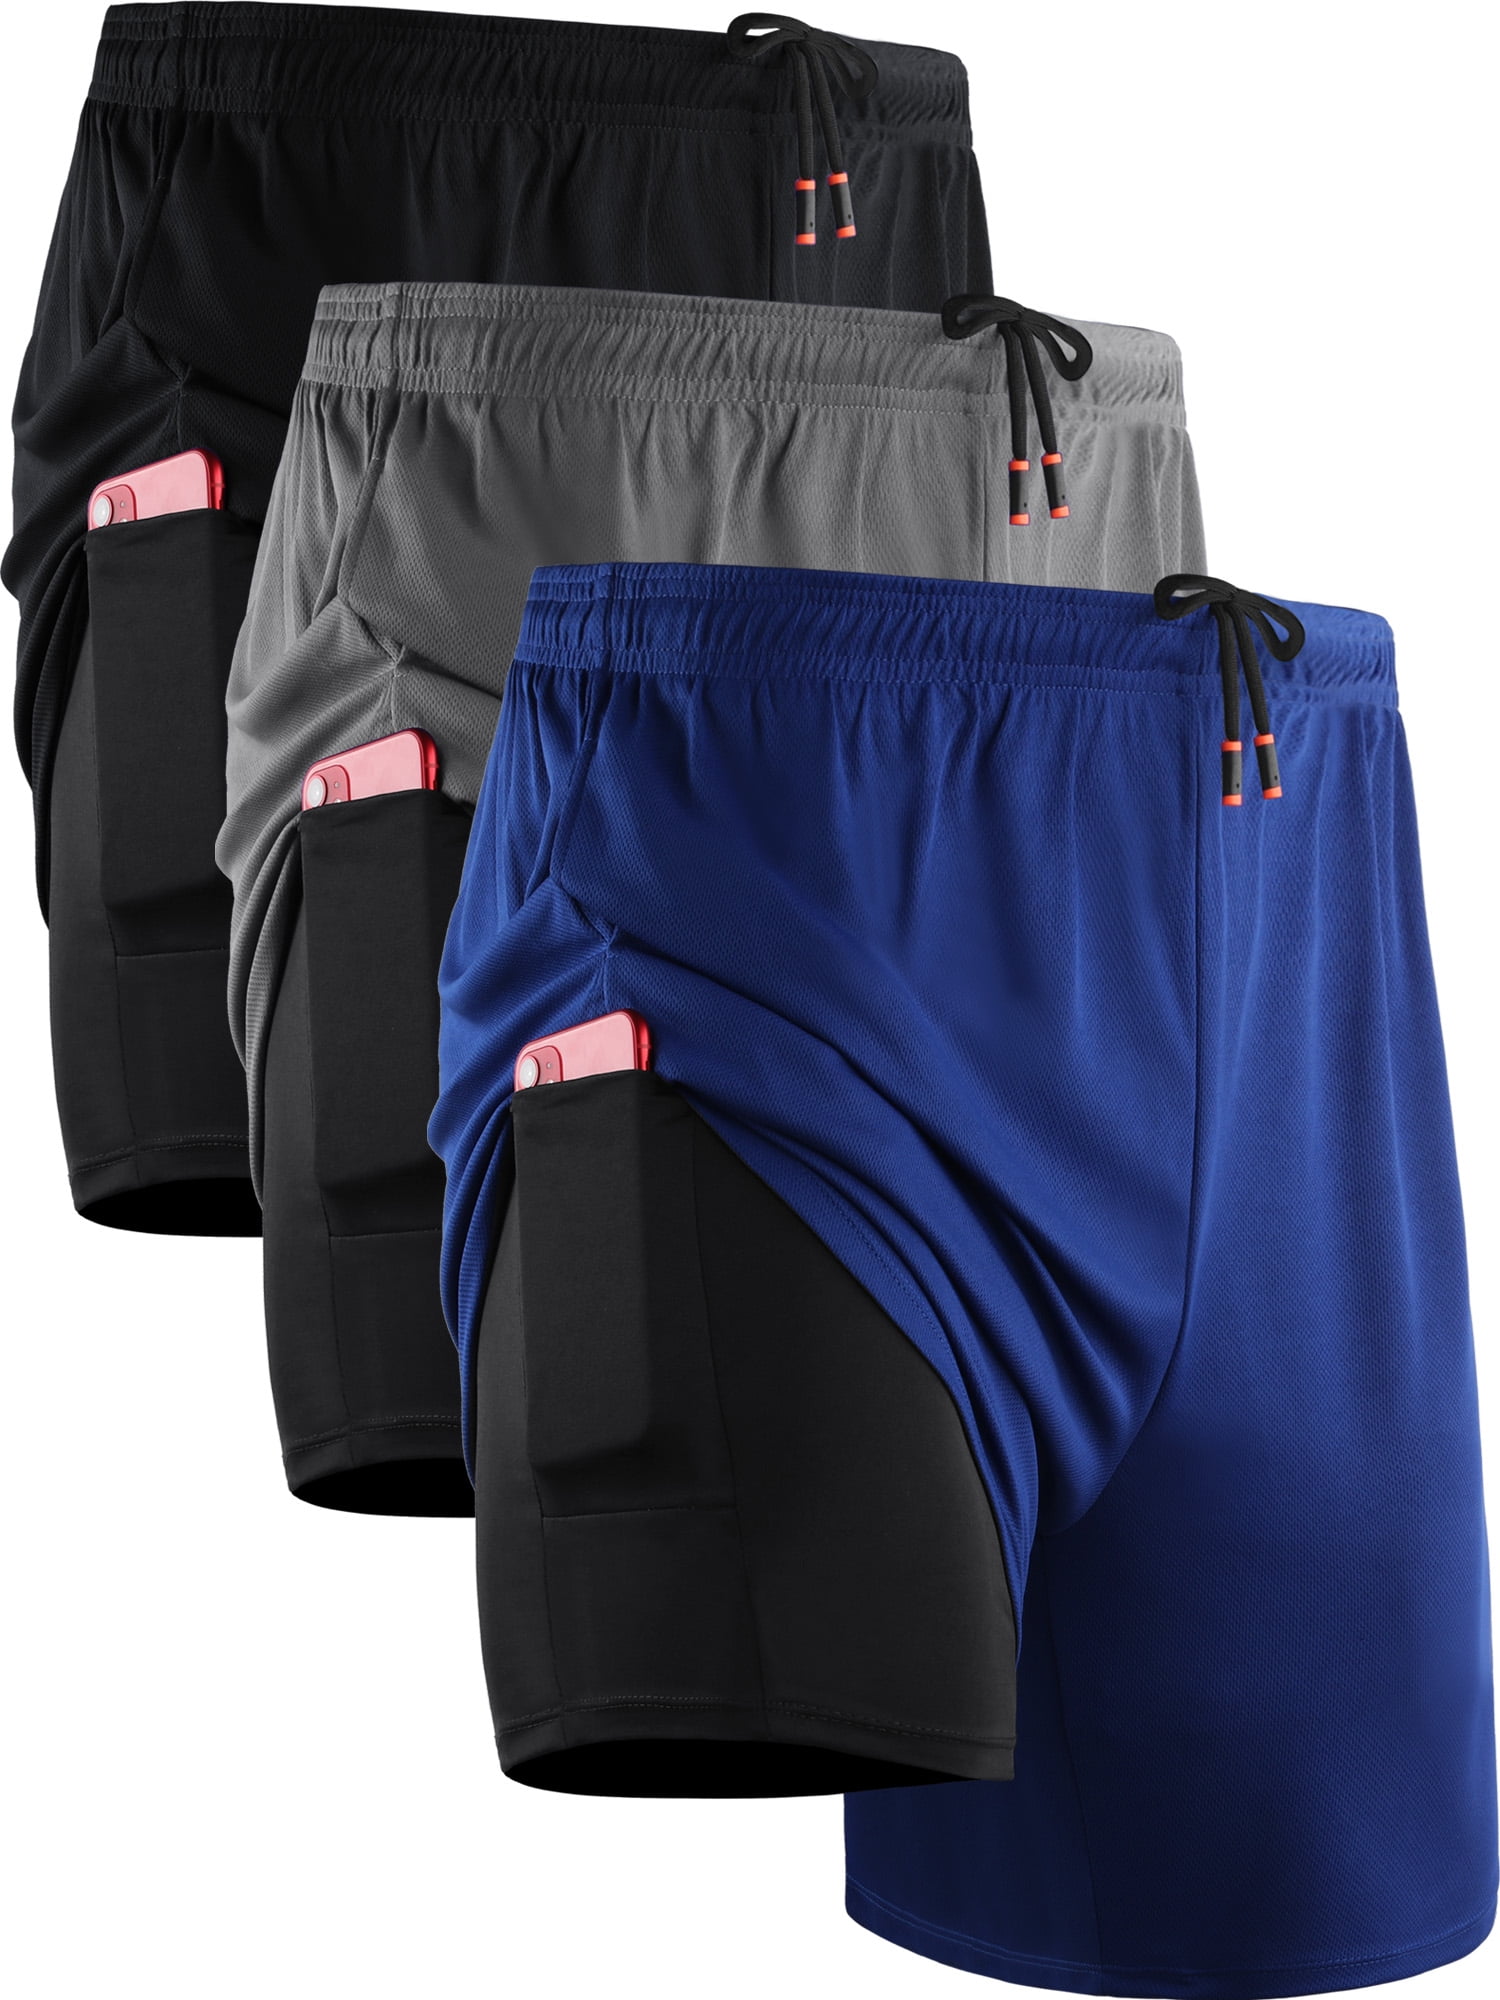 Neleus Mens Dry Fit Performance Short with Pockets